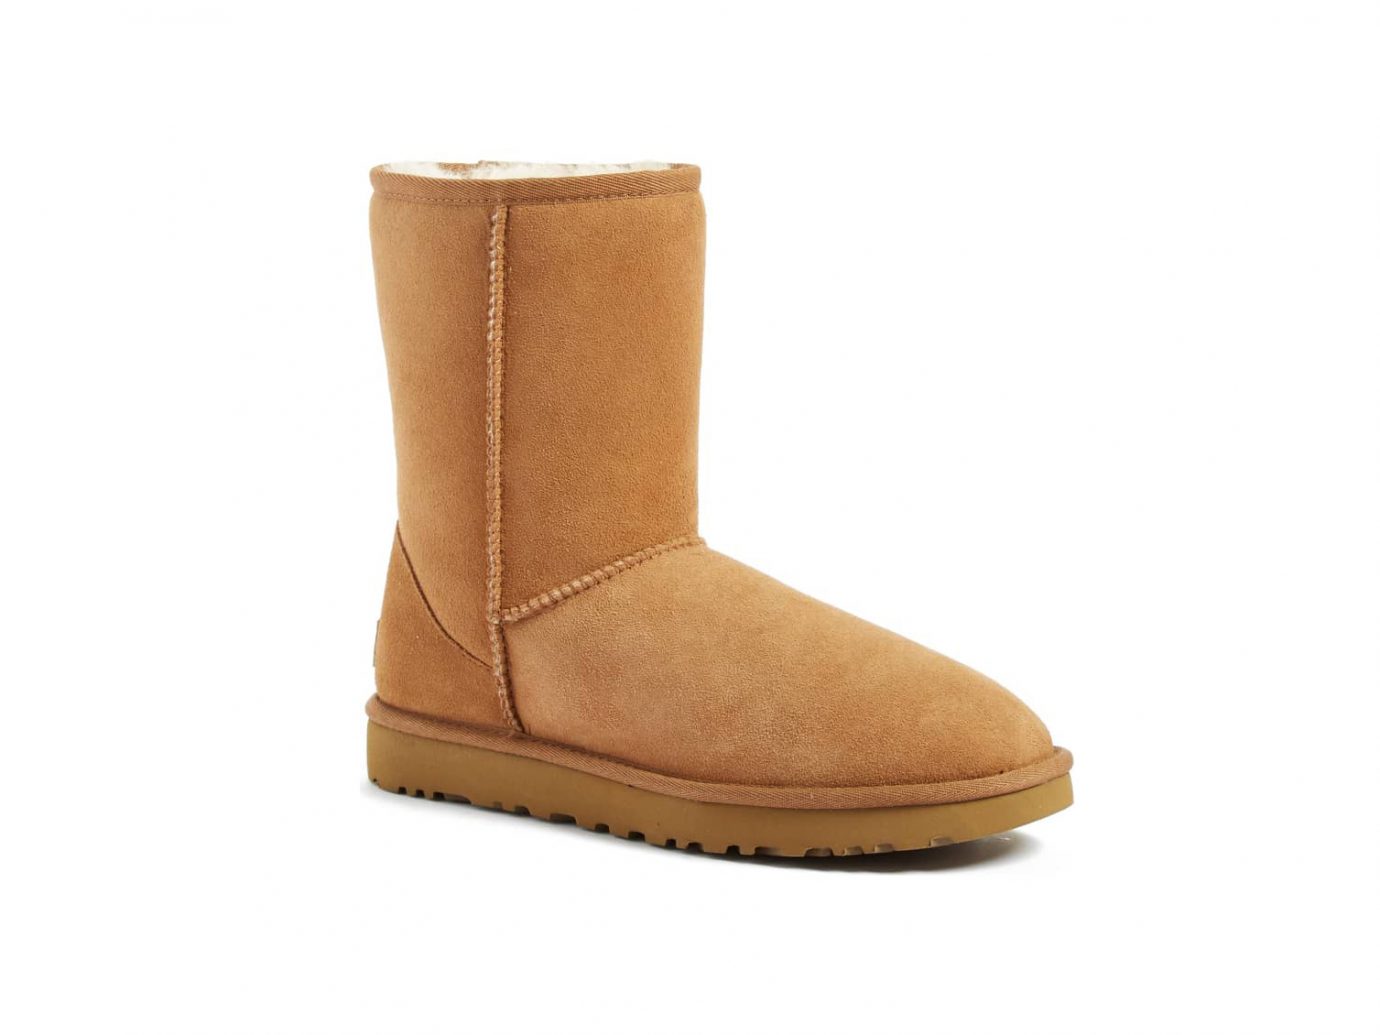 'Classic II' Genuine Shearling Lined Short Boot